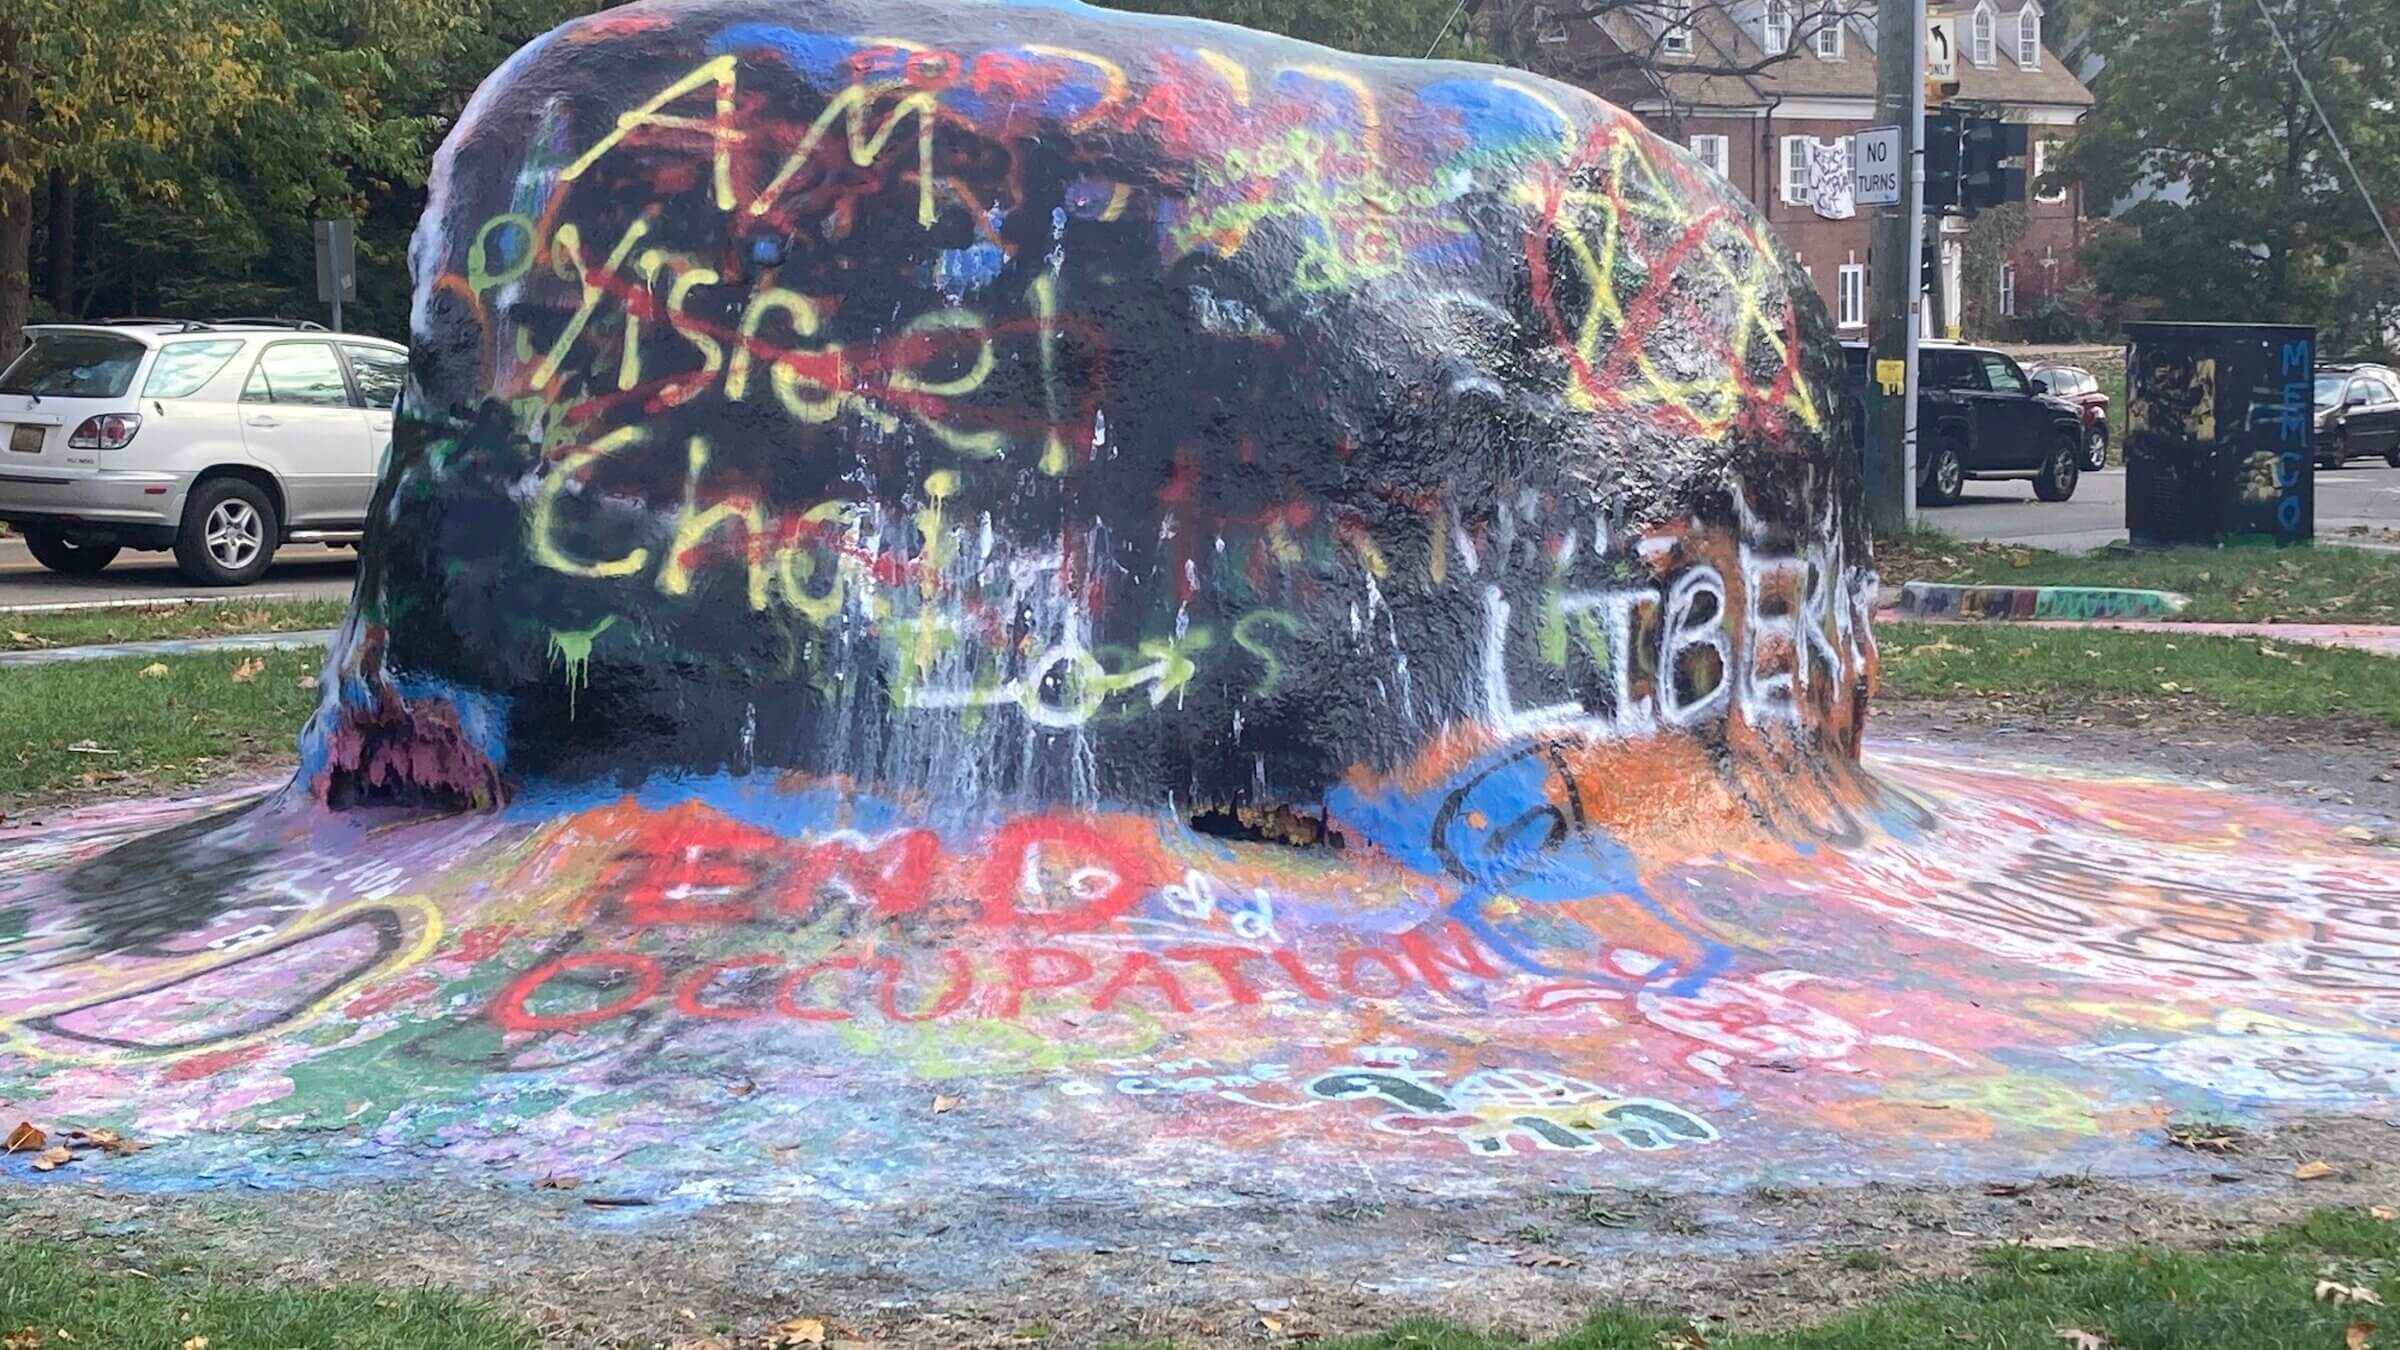 The Rock, a landmark by the University of Michigan, covered in graffiti with slogans about the war. Jewish stars and the phrase "Am Yisrael Chai" were painted over in red.